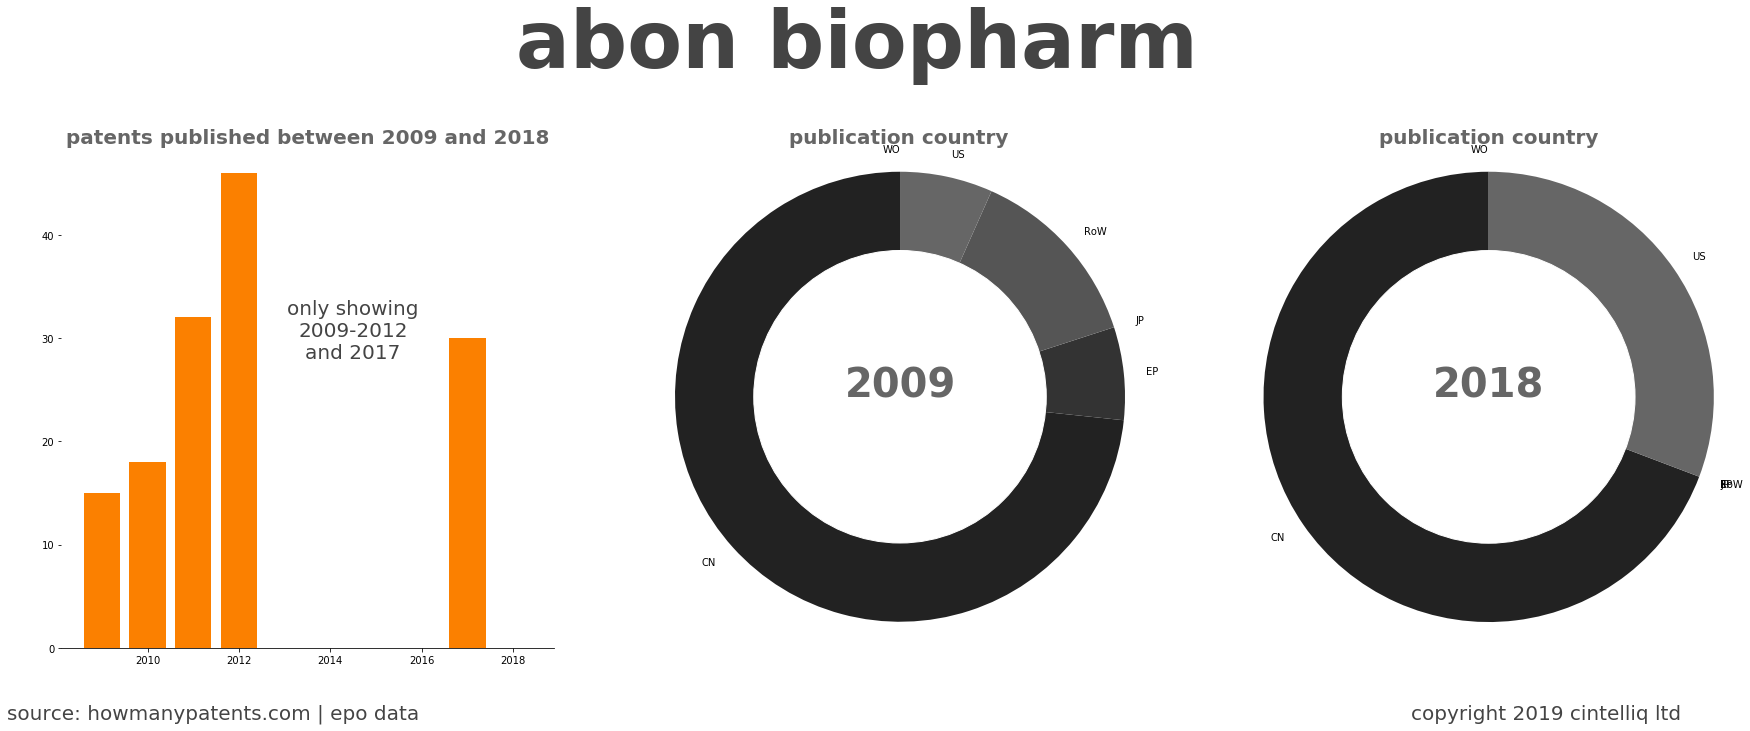 summary of patents for Abon Biopharm 